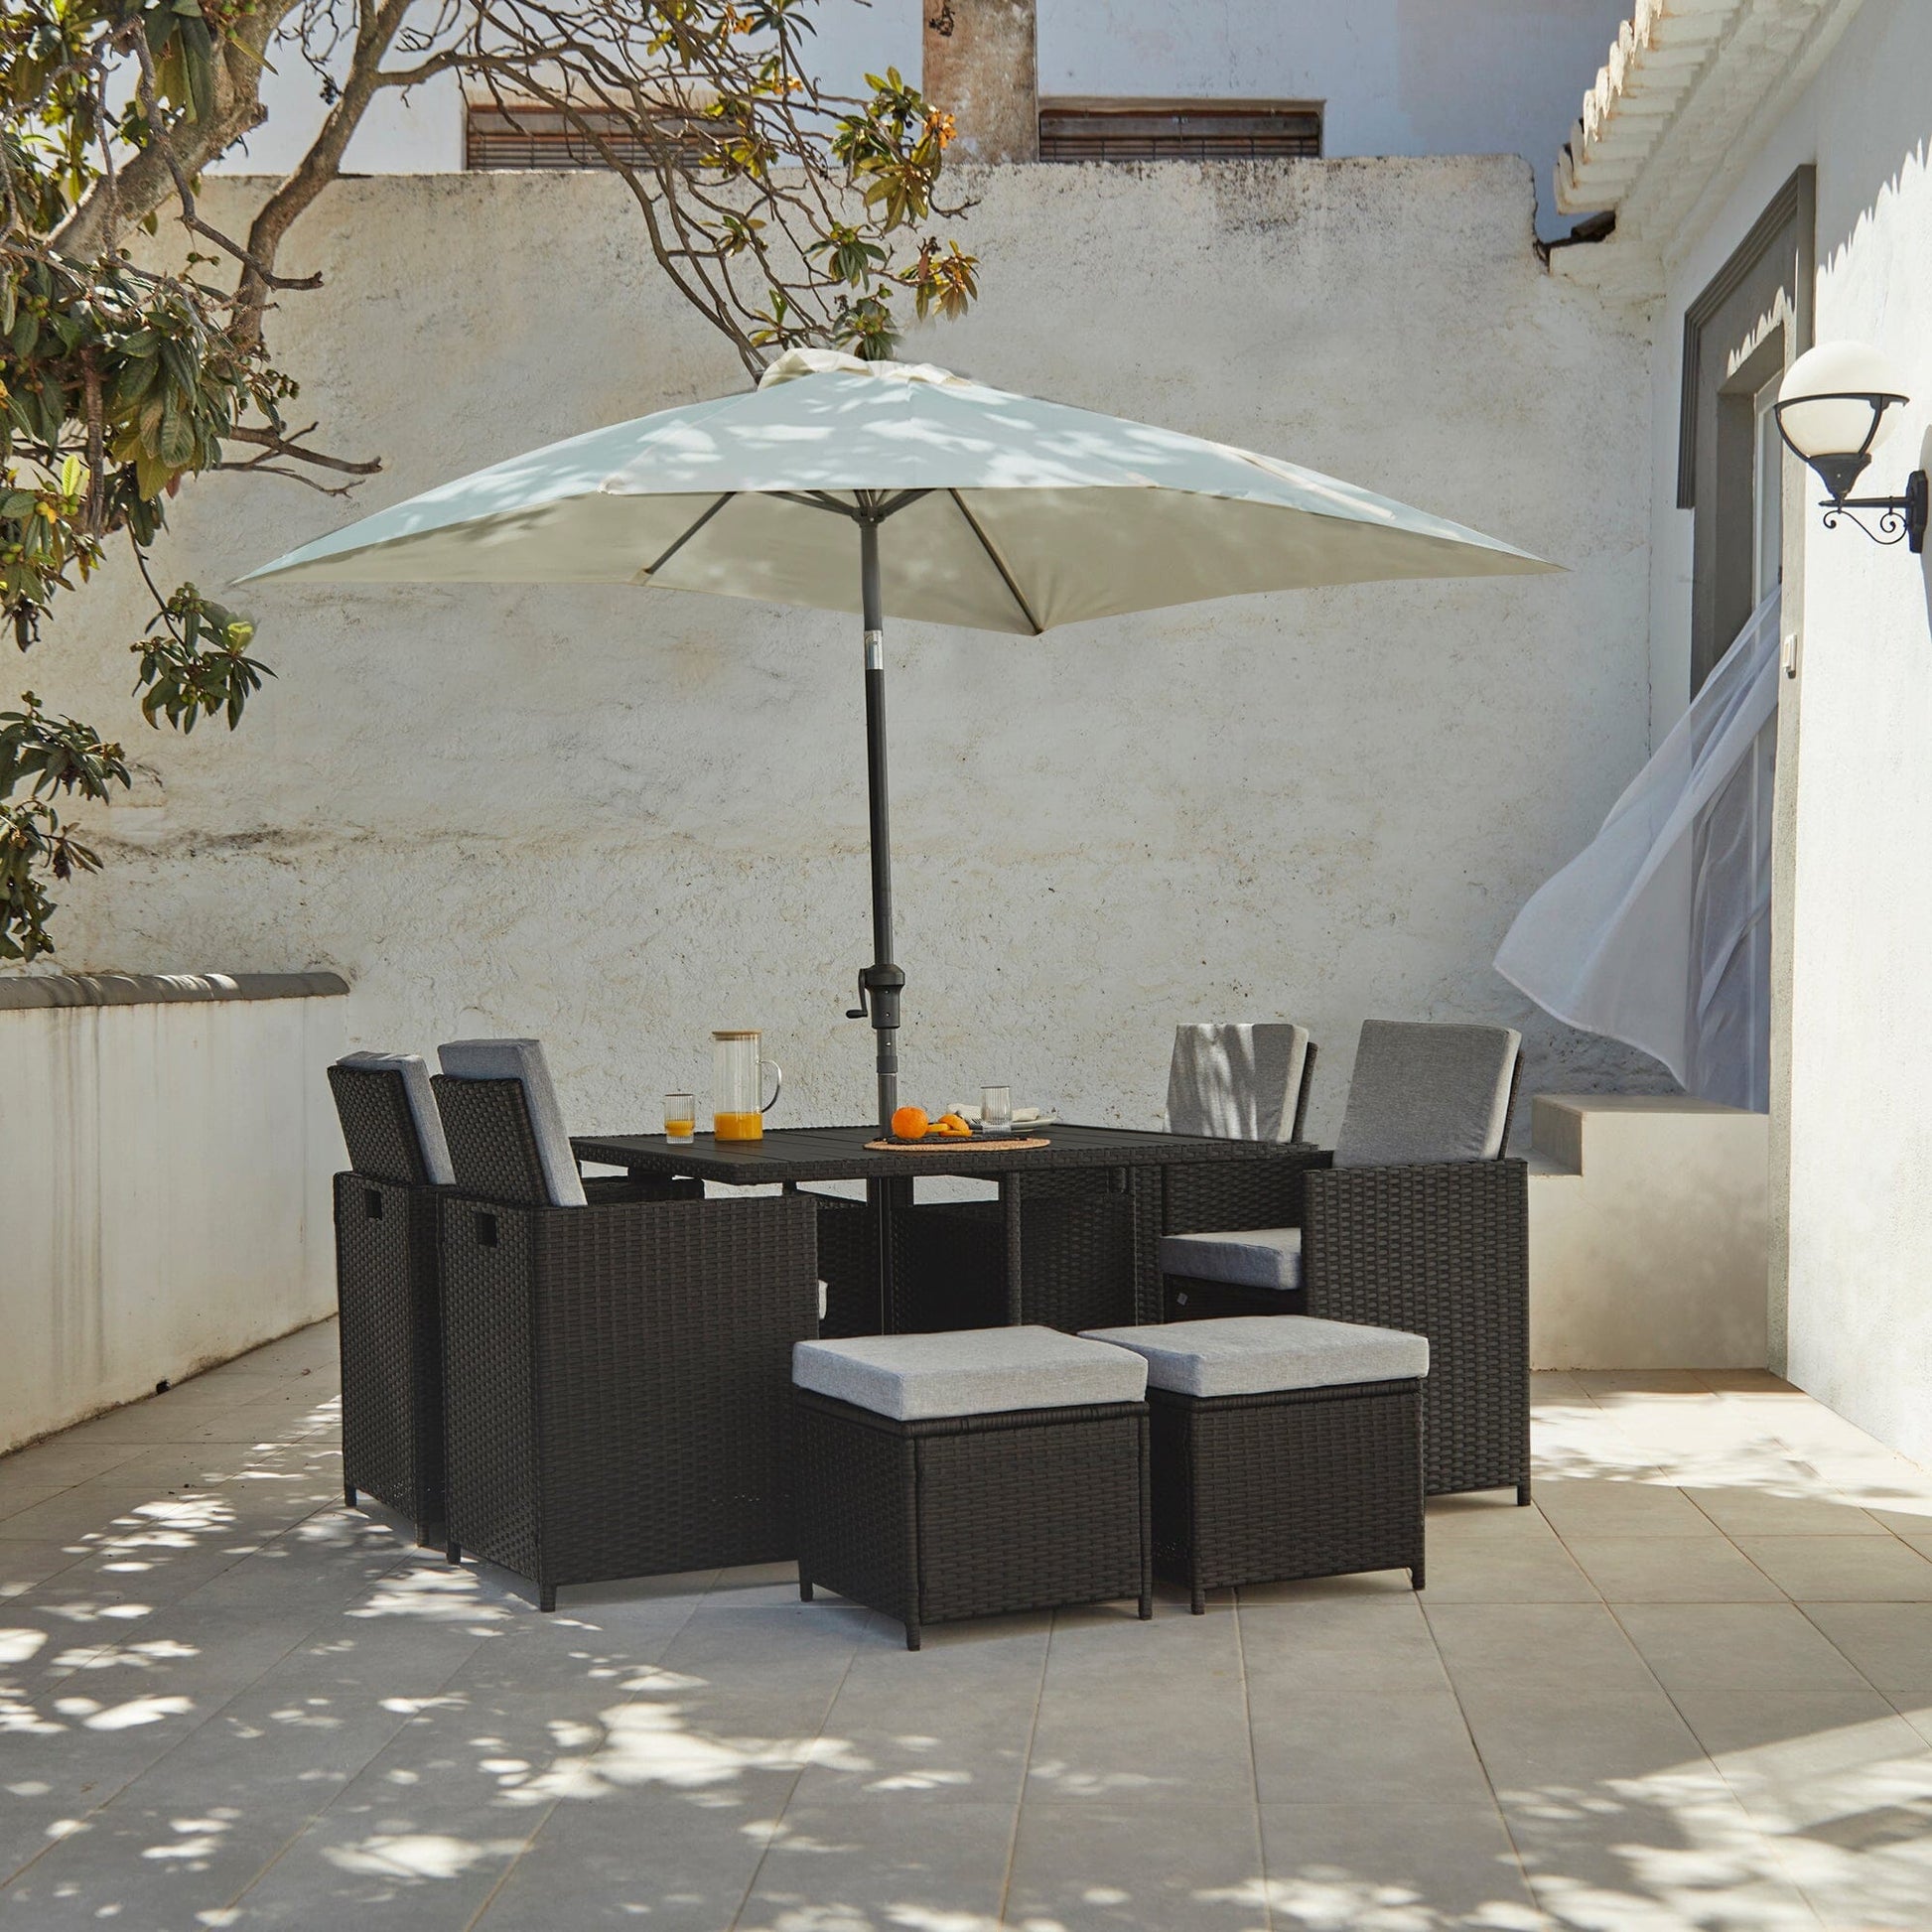 8 Seater Rattan Cube Outdoor Dining Set with Premium LED Cream Parasol - Black Weave Polywood Top - Laura James